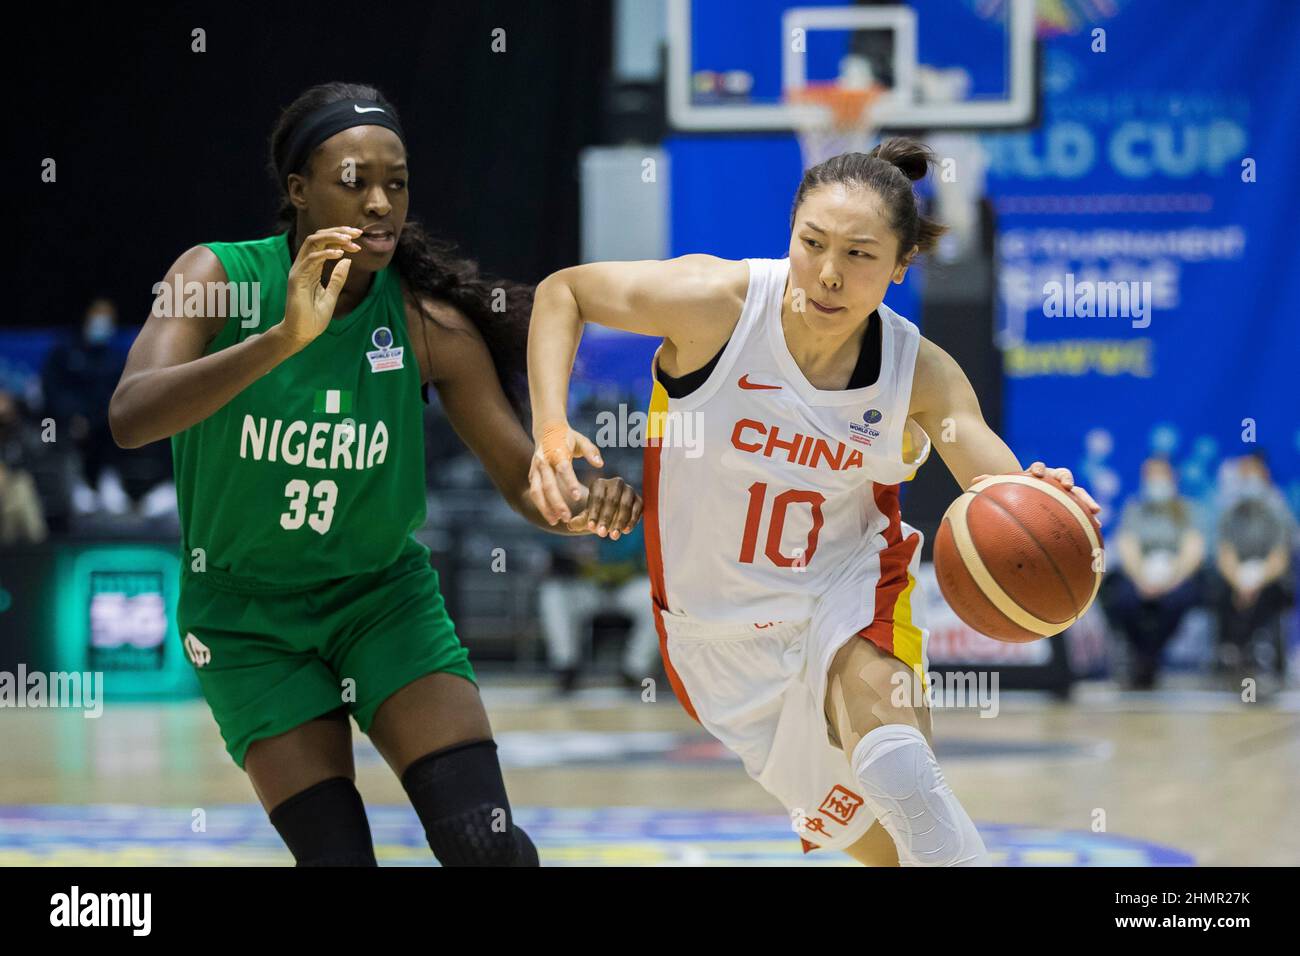 Belgrade, Serbia, 10th February 2022. Ru Zhang of China drives to the basket during the FIBA Women's Basketball World Cup Qualifying Tournament match between China v Nigeria in Belgrade, Serbia. February 10, 2022. Credit: Nikola Krstic/Alamy Stock Photo